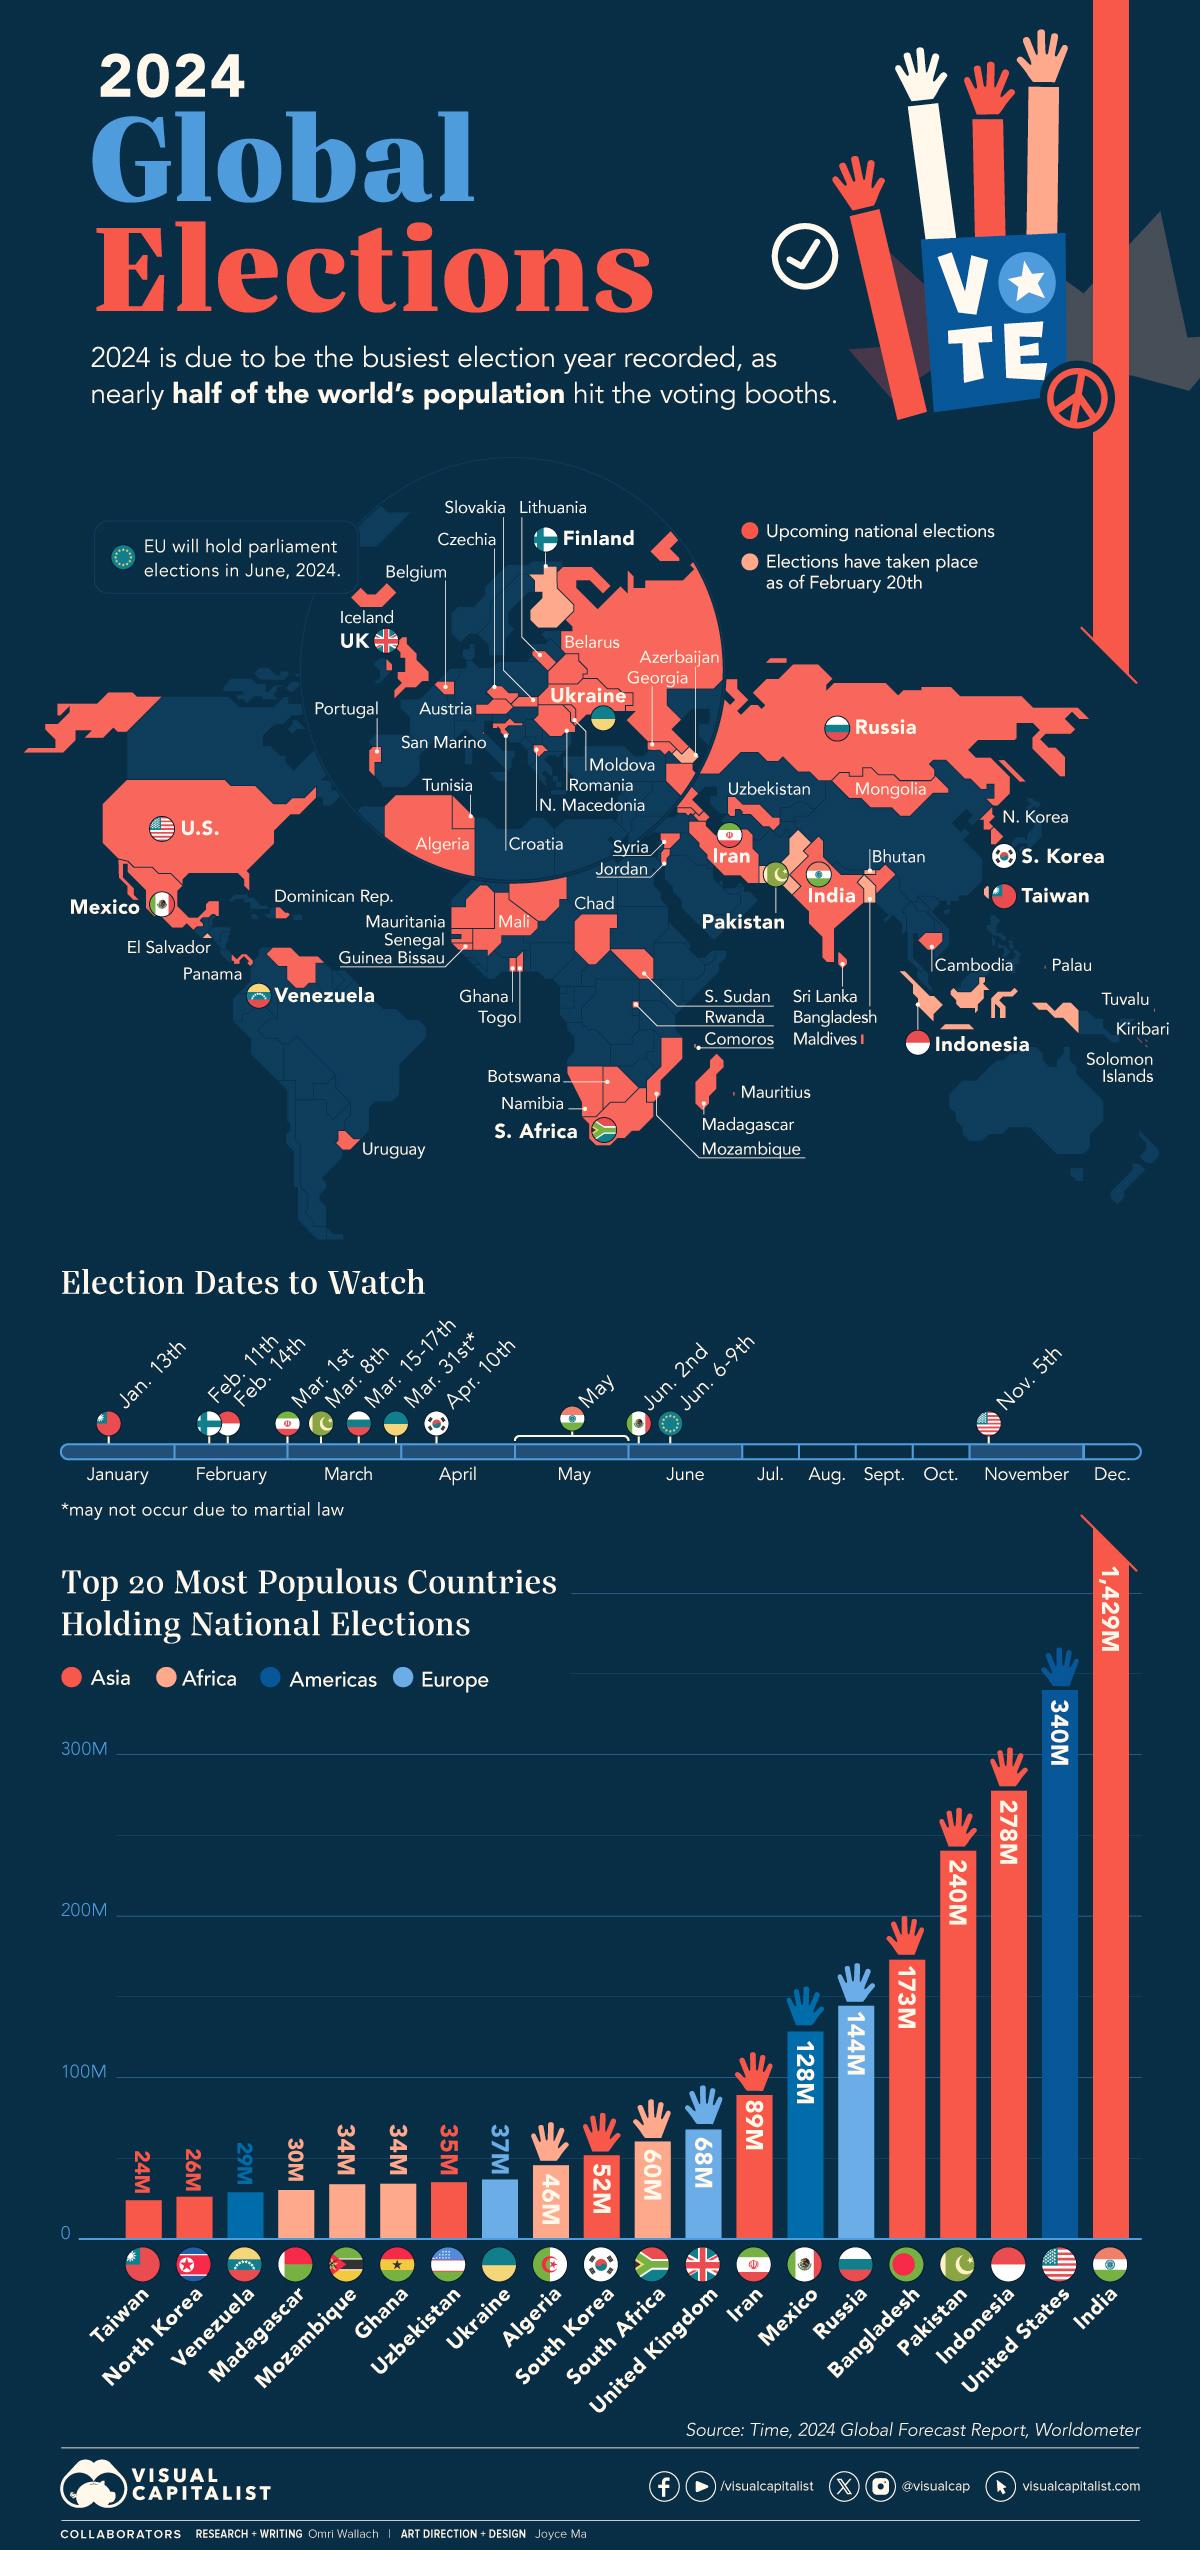 Mapped: 2024 Global Elections by Country